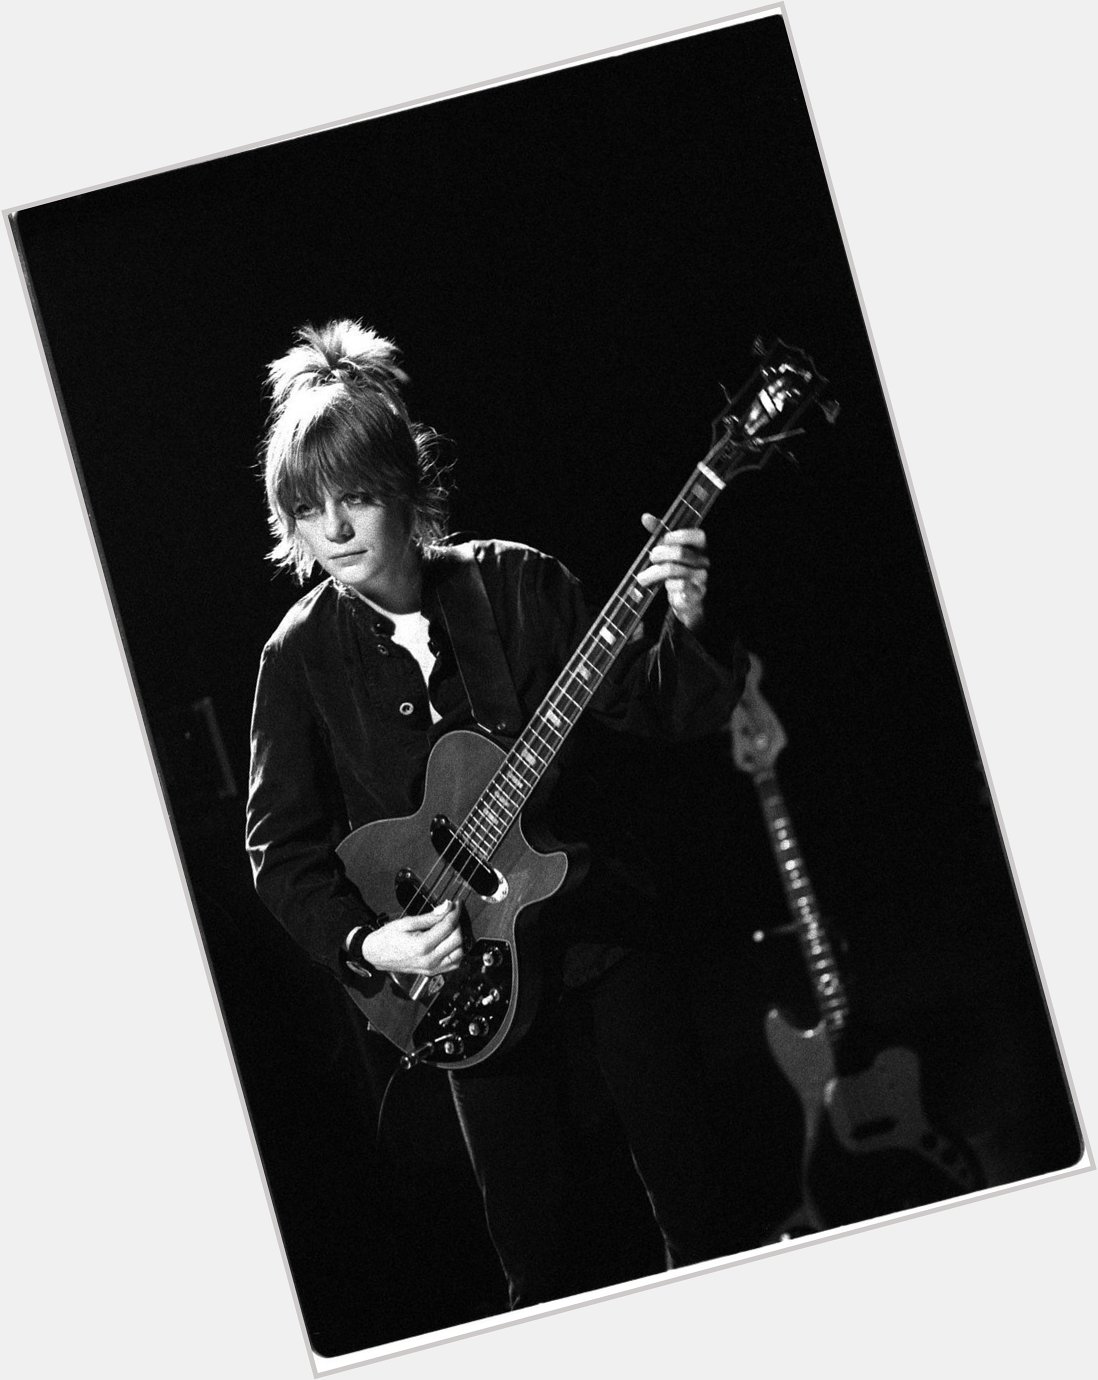 Happy Birthday Tina Weymouth - born on this day in 1950. 